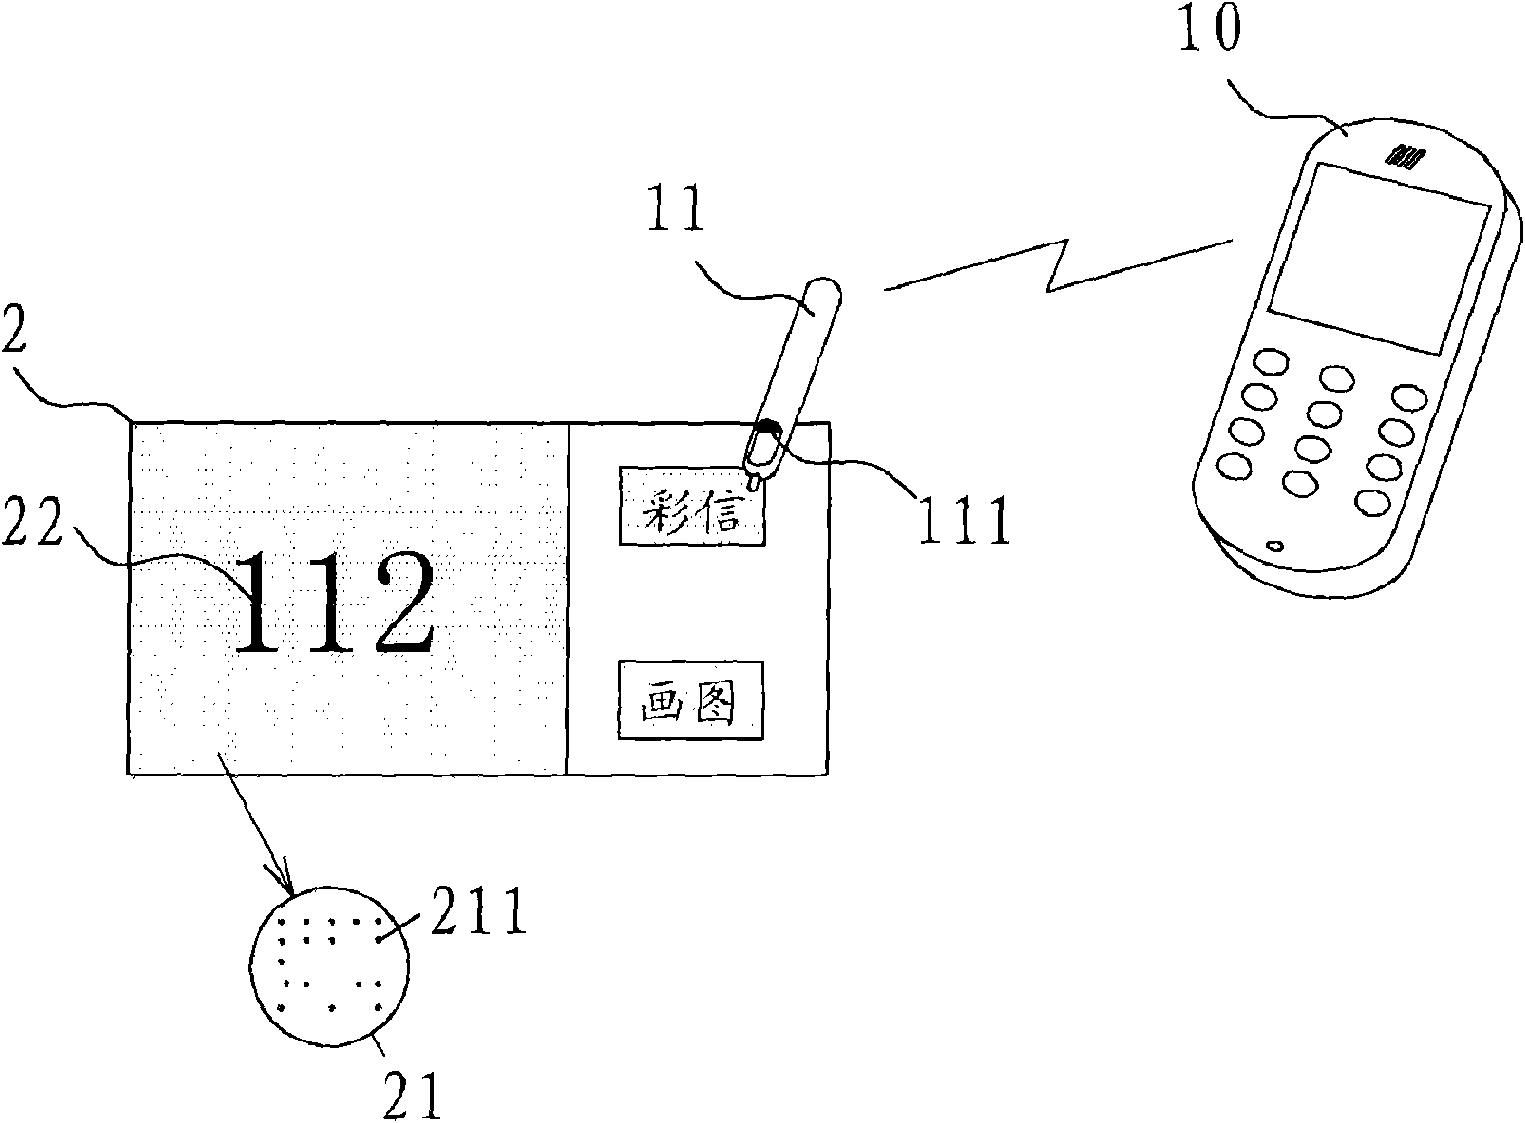 Mobile communication system using hand-written information as multimedia message content